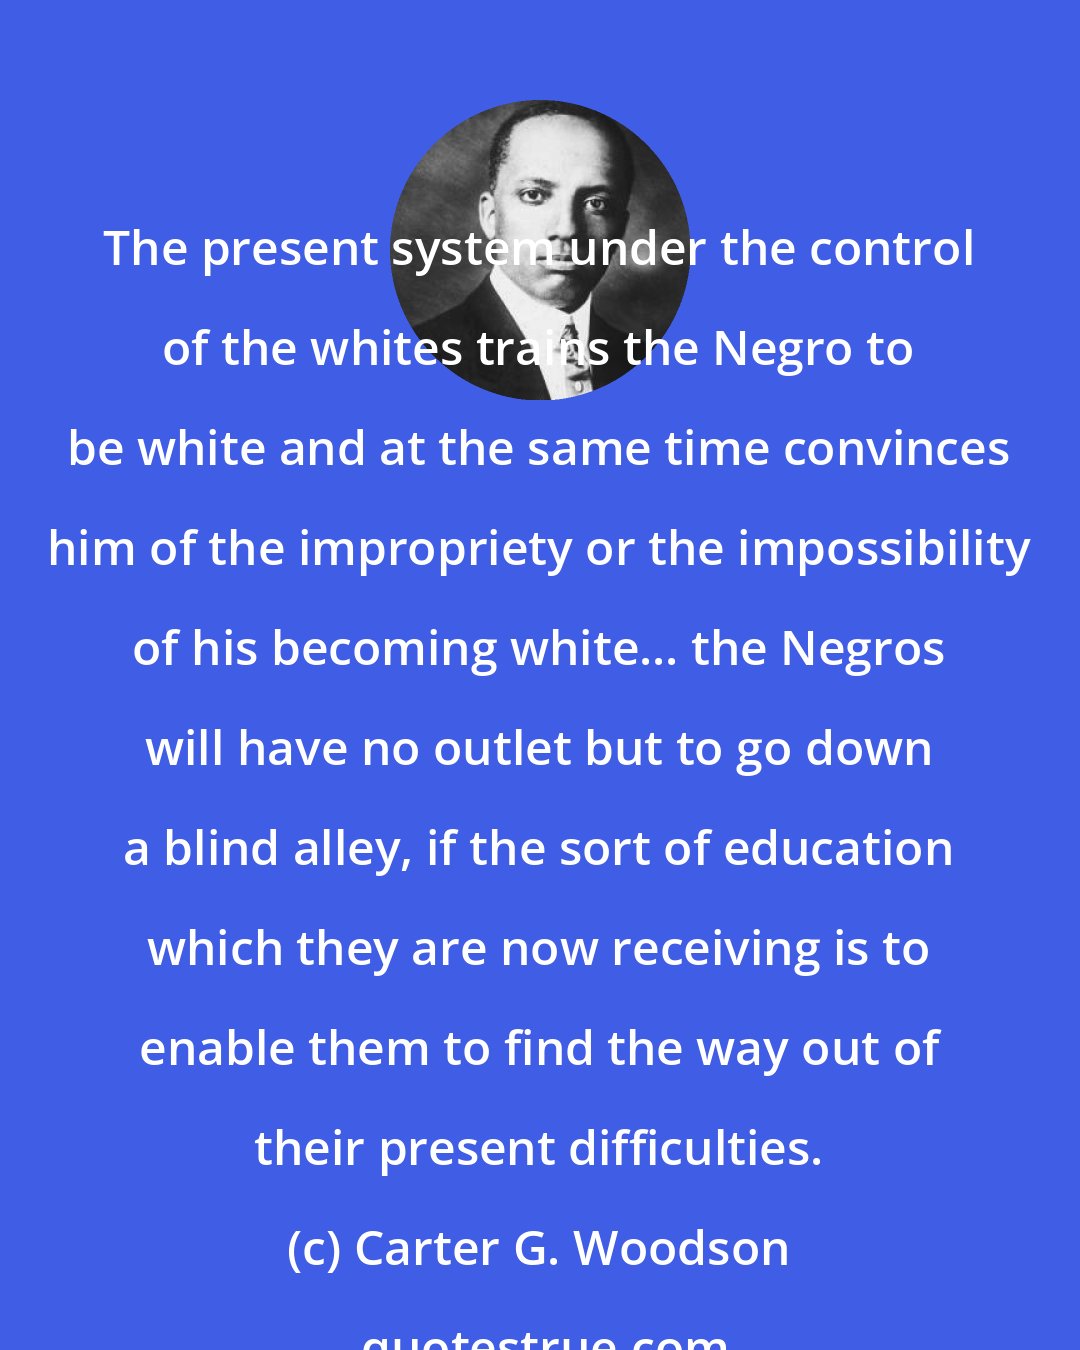 Carter G. Woodson: The present system under the control of the whites trains the Negro to be white and at the same time convinces him of the impropriety or the impossibility of his becoming white... the Negros will have no outlet but to go down a blind alley, if the sort of education which they are now receiving is to enable them to find the way out of their present difficulties.